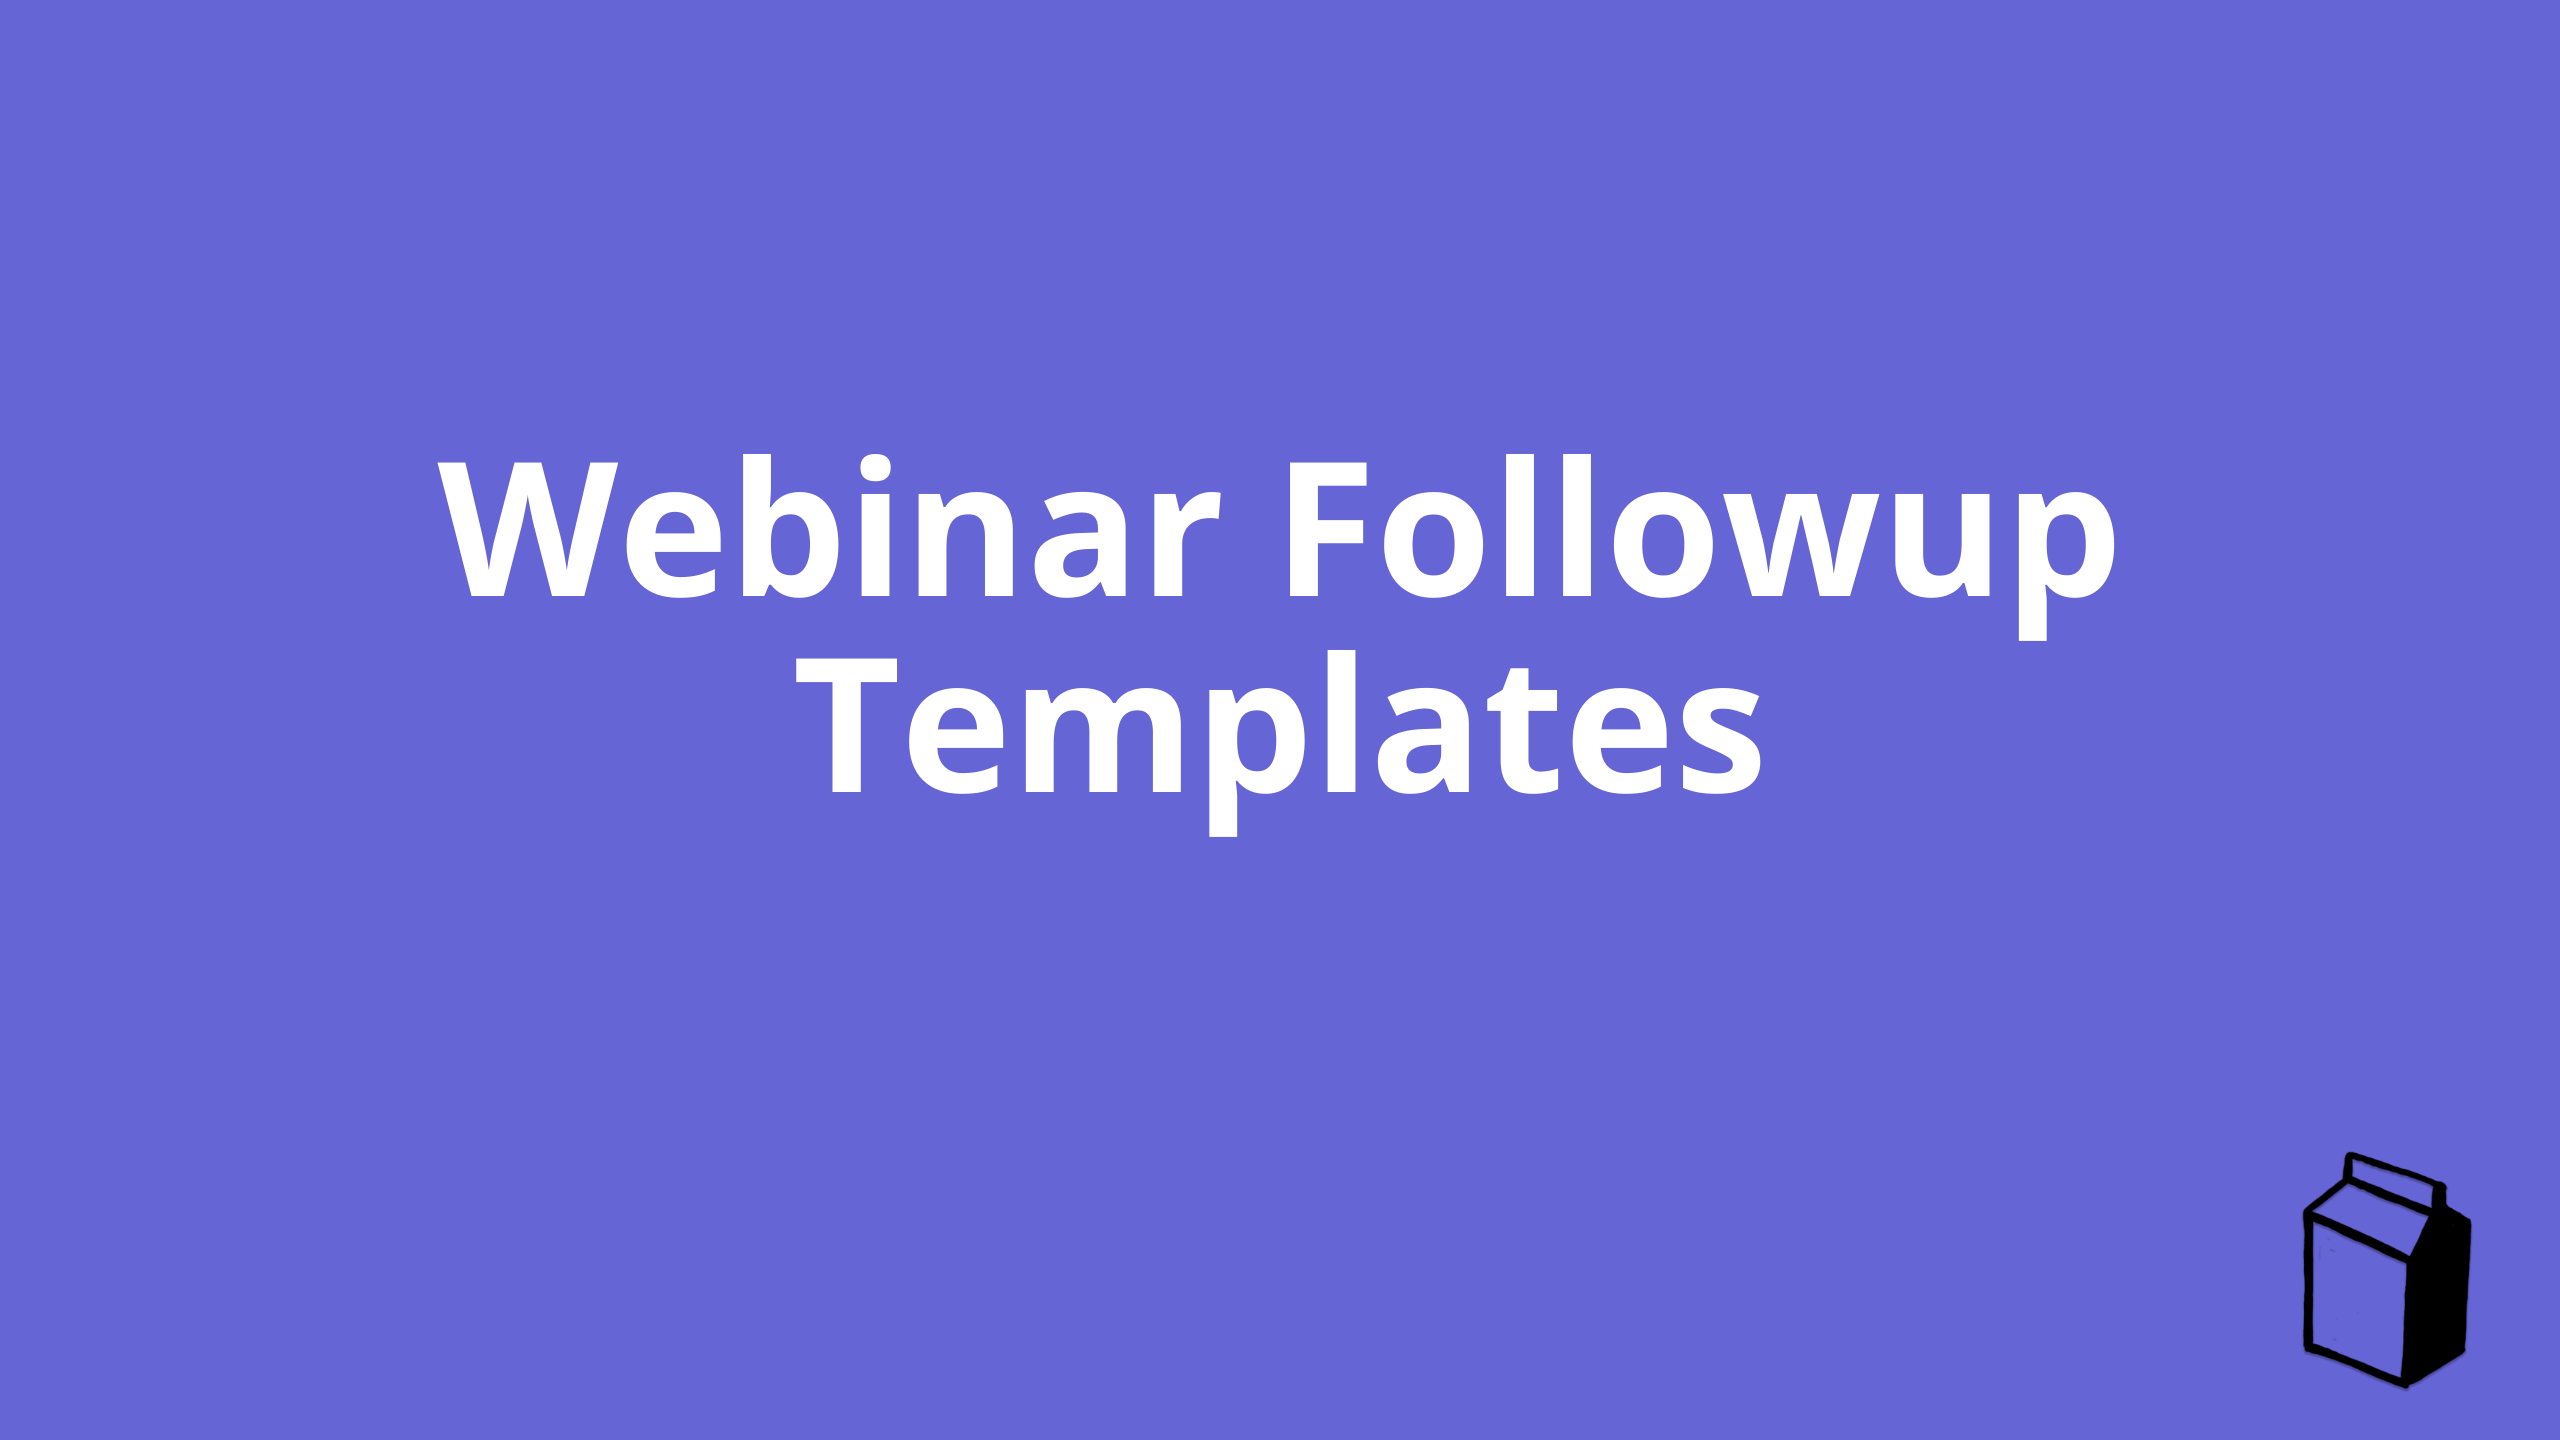 5 Email Templates for Great Webinar Followup